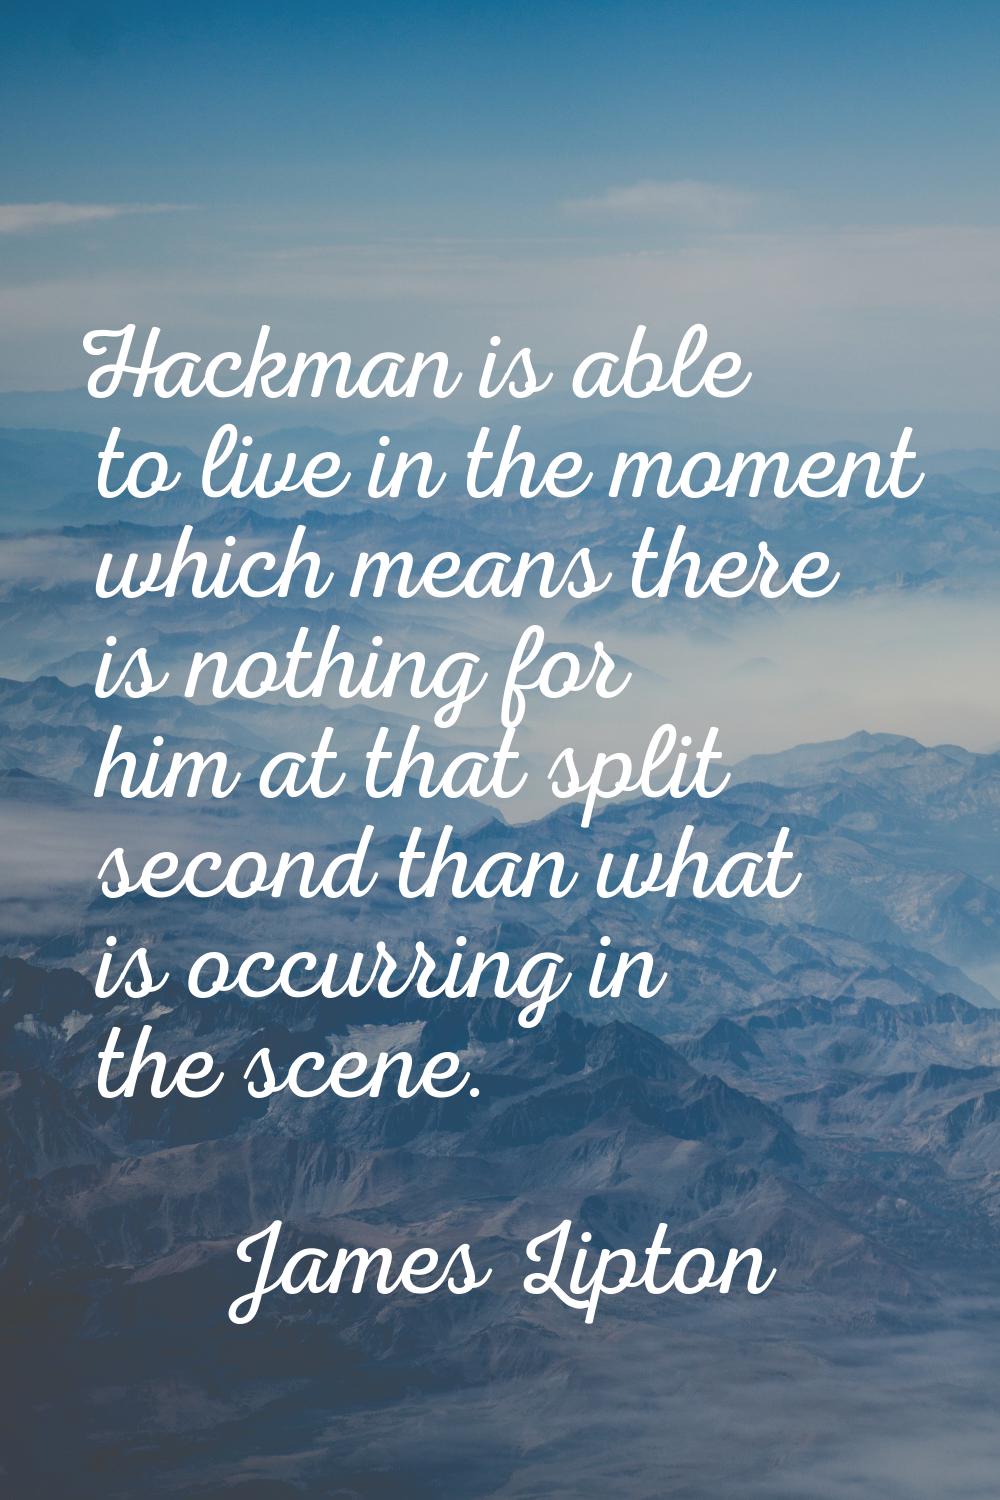 Hackman is able to live in the moment which means there is nothing for him at that split second tha